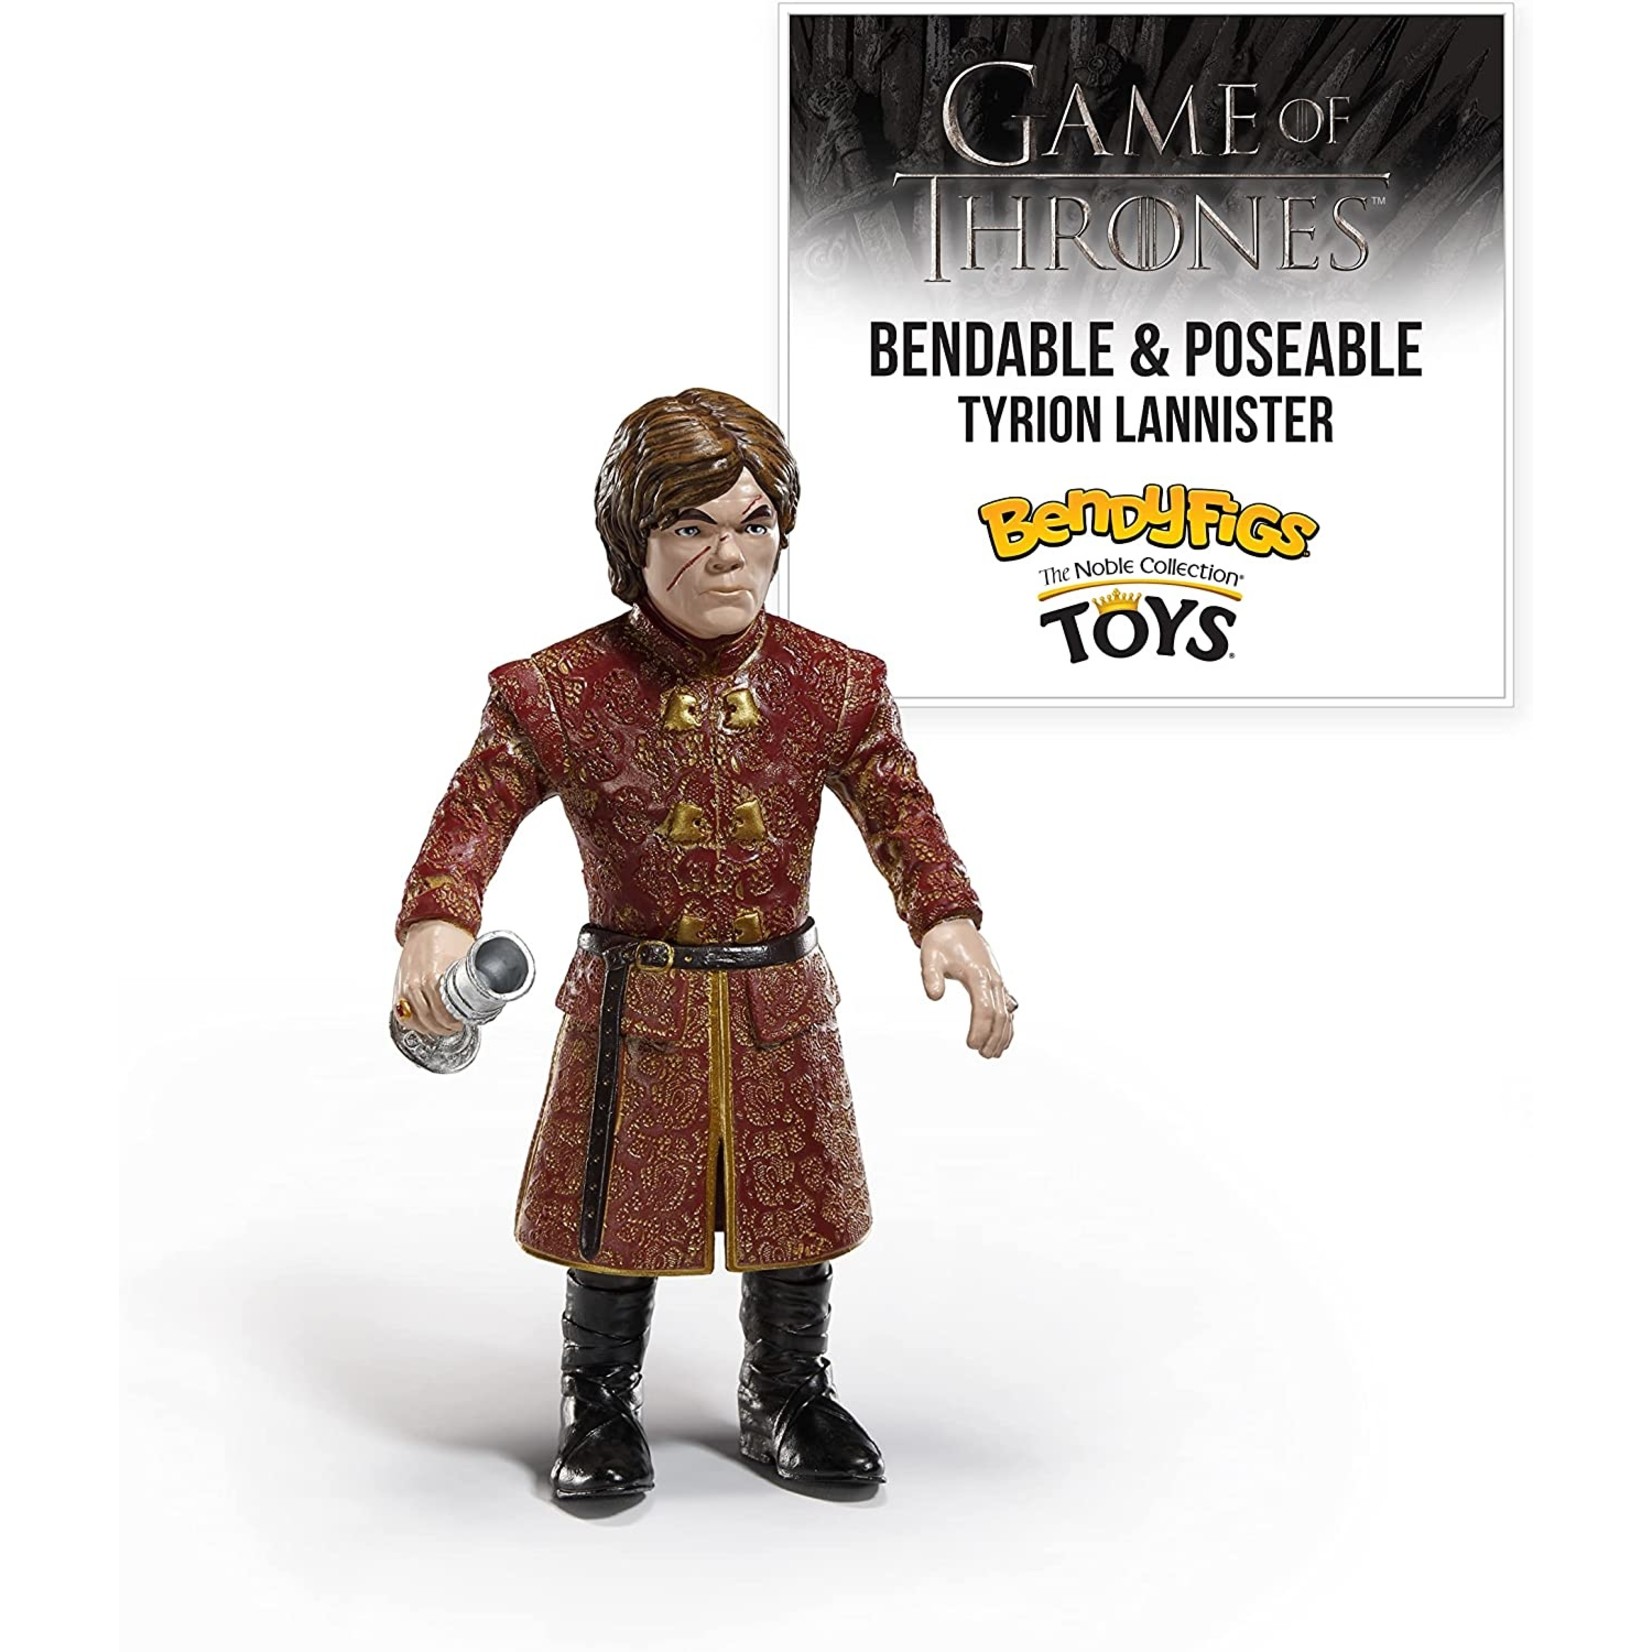 The Noble Collection The Noble Collection Bendyfigs Game of Thrones Tyrion Lannister